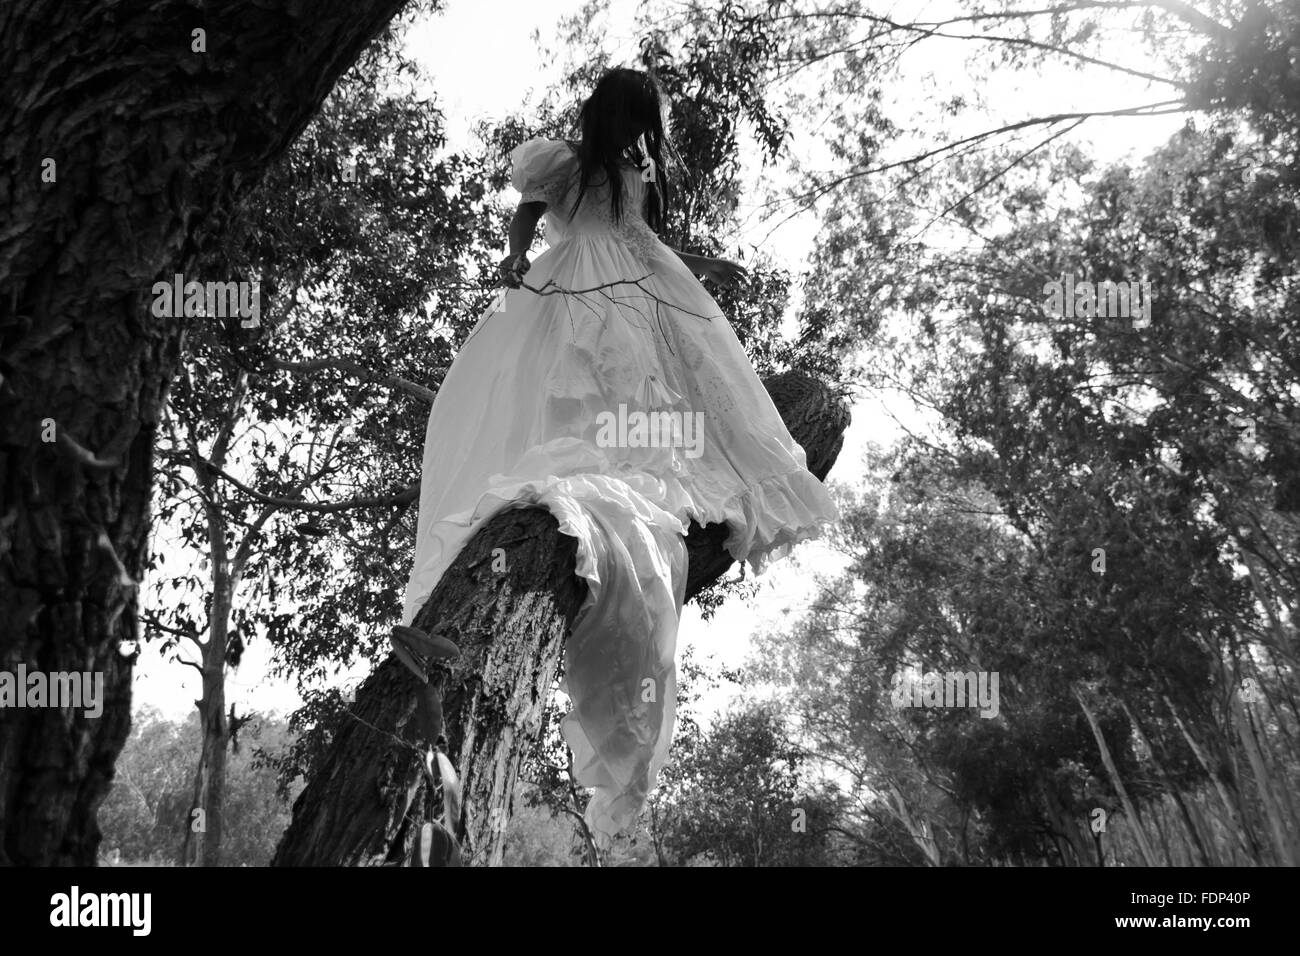 Mysterious Woman in White Dress in the Forest Stock Photo